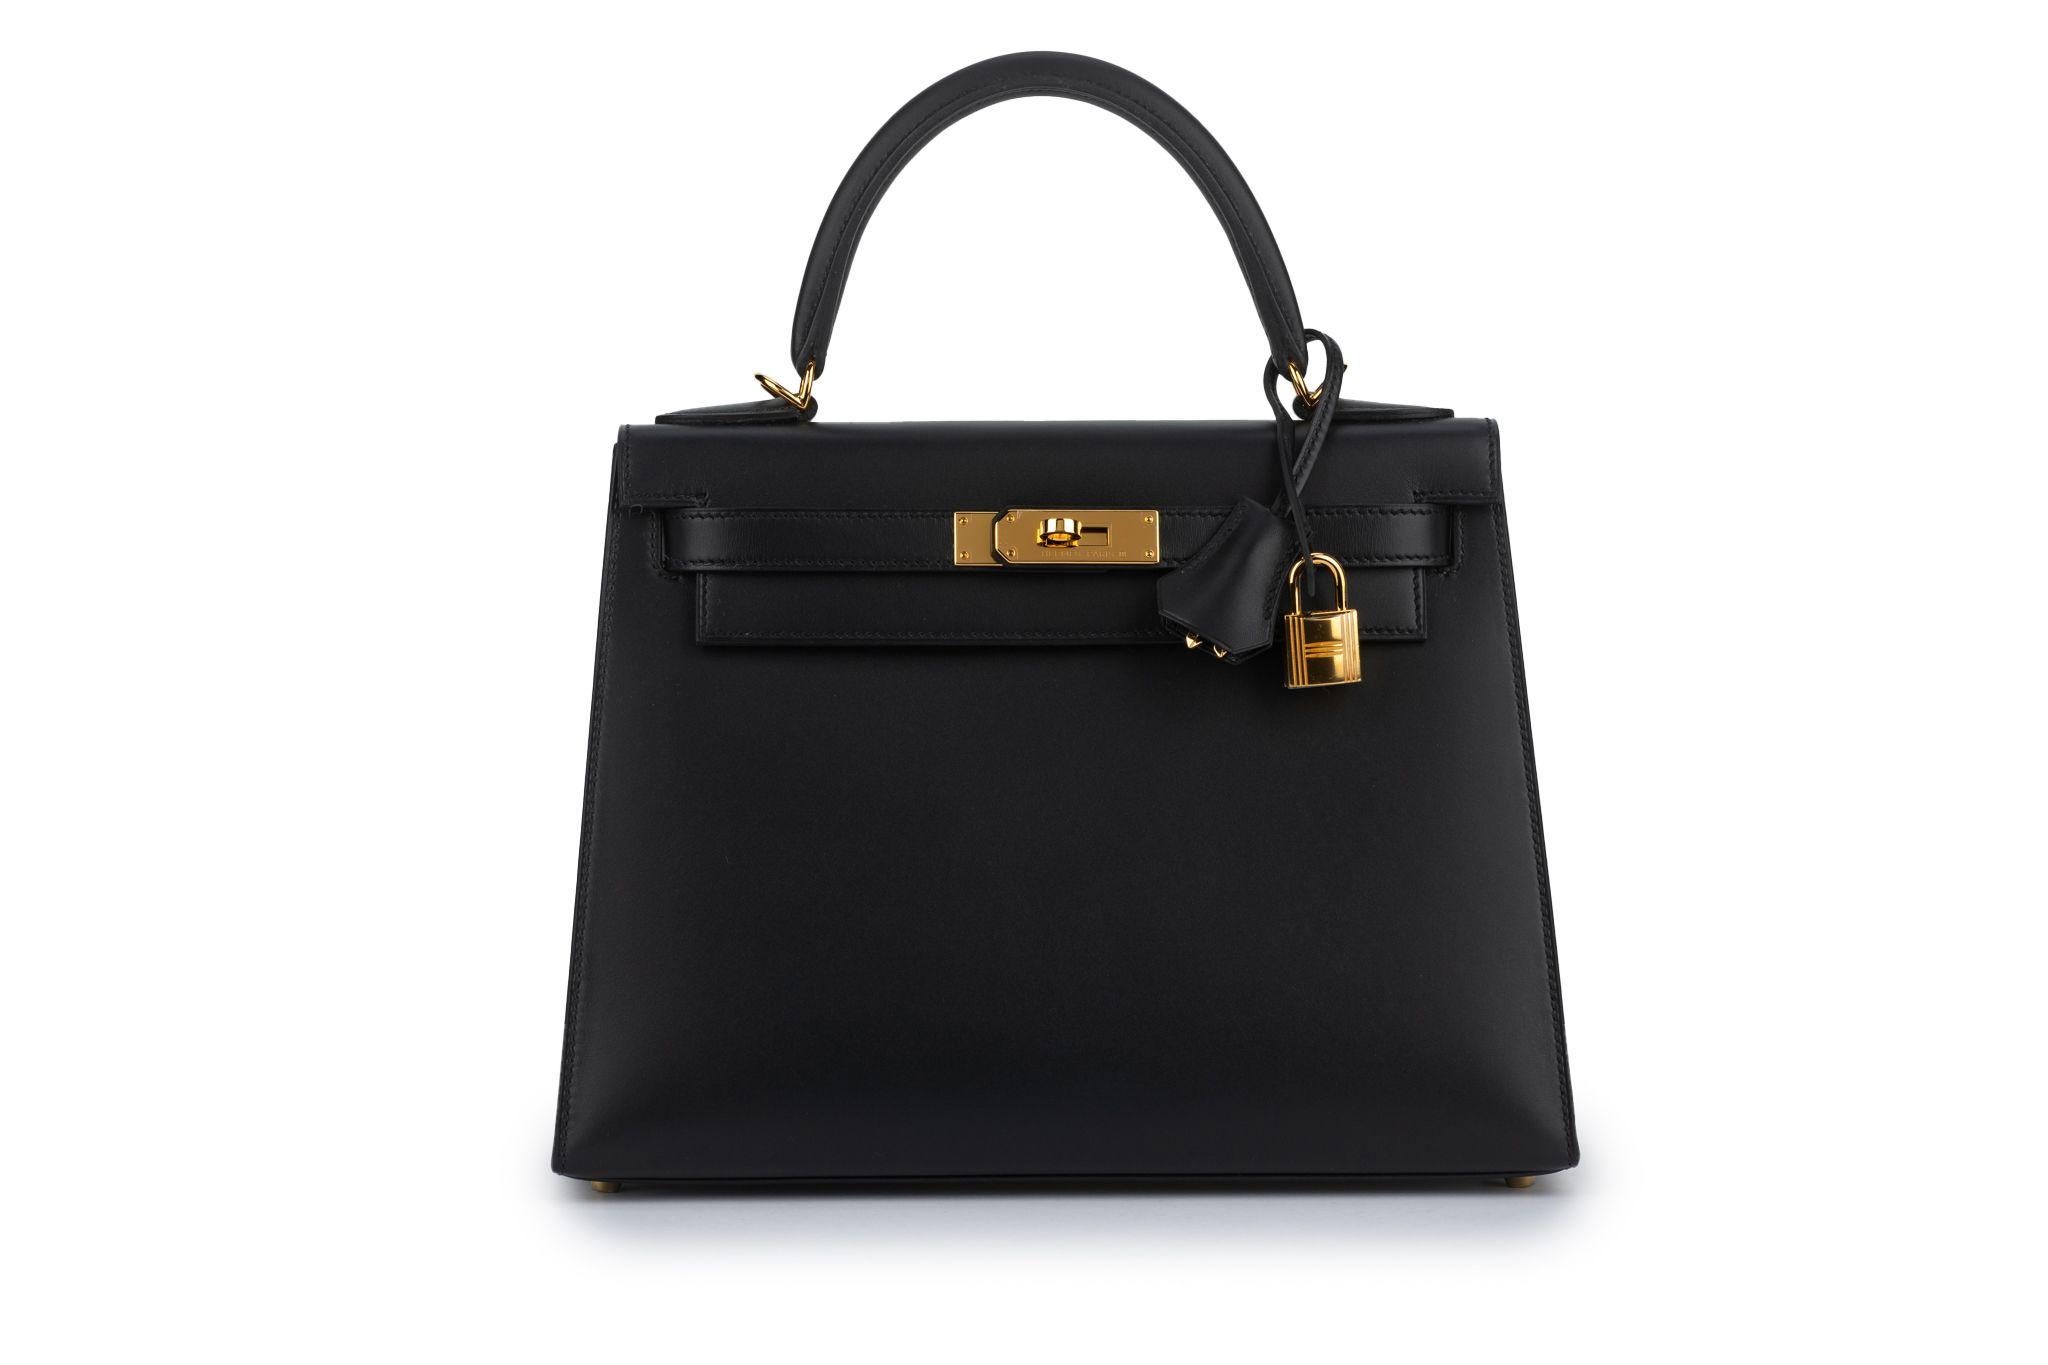 Hermès brand new kelly 28 sellier in black sombrero leather and gold tone hardware. Date stamp A. 
Handle drop 3.5